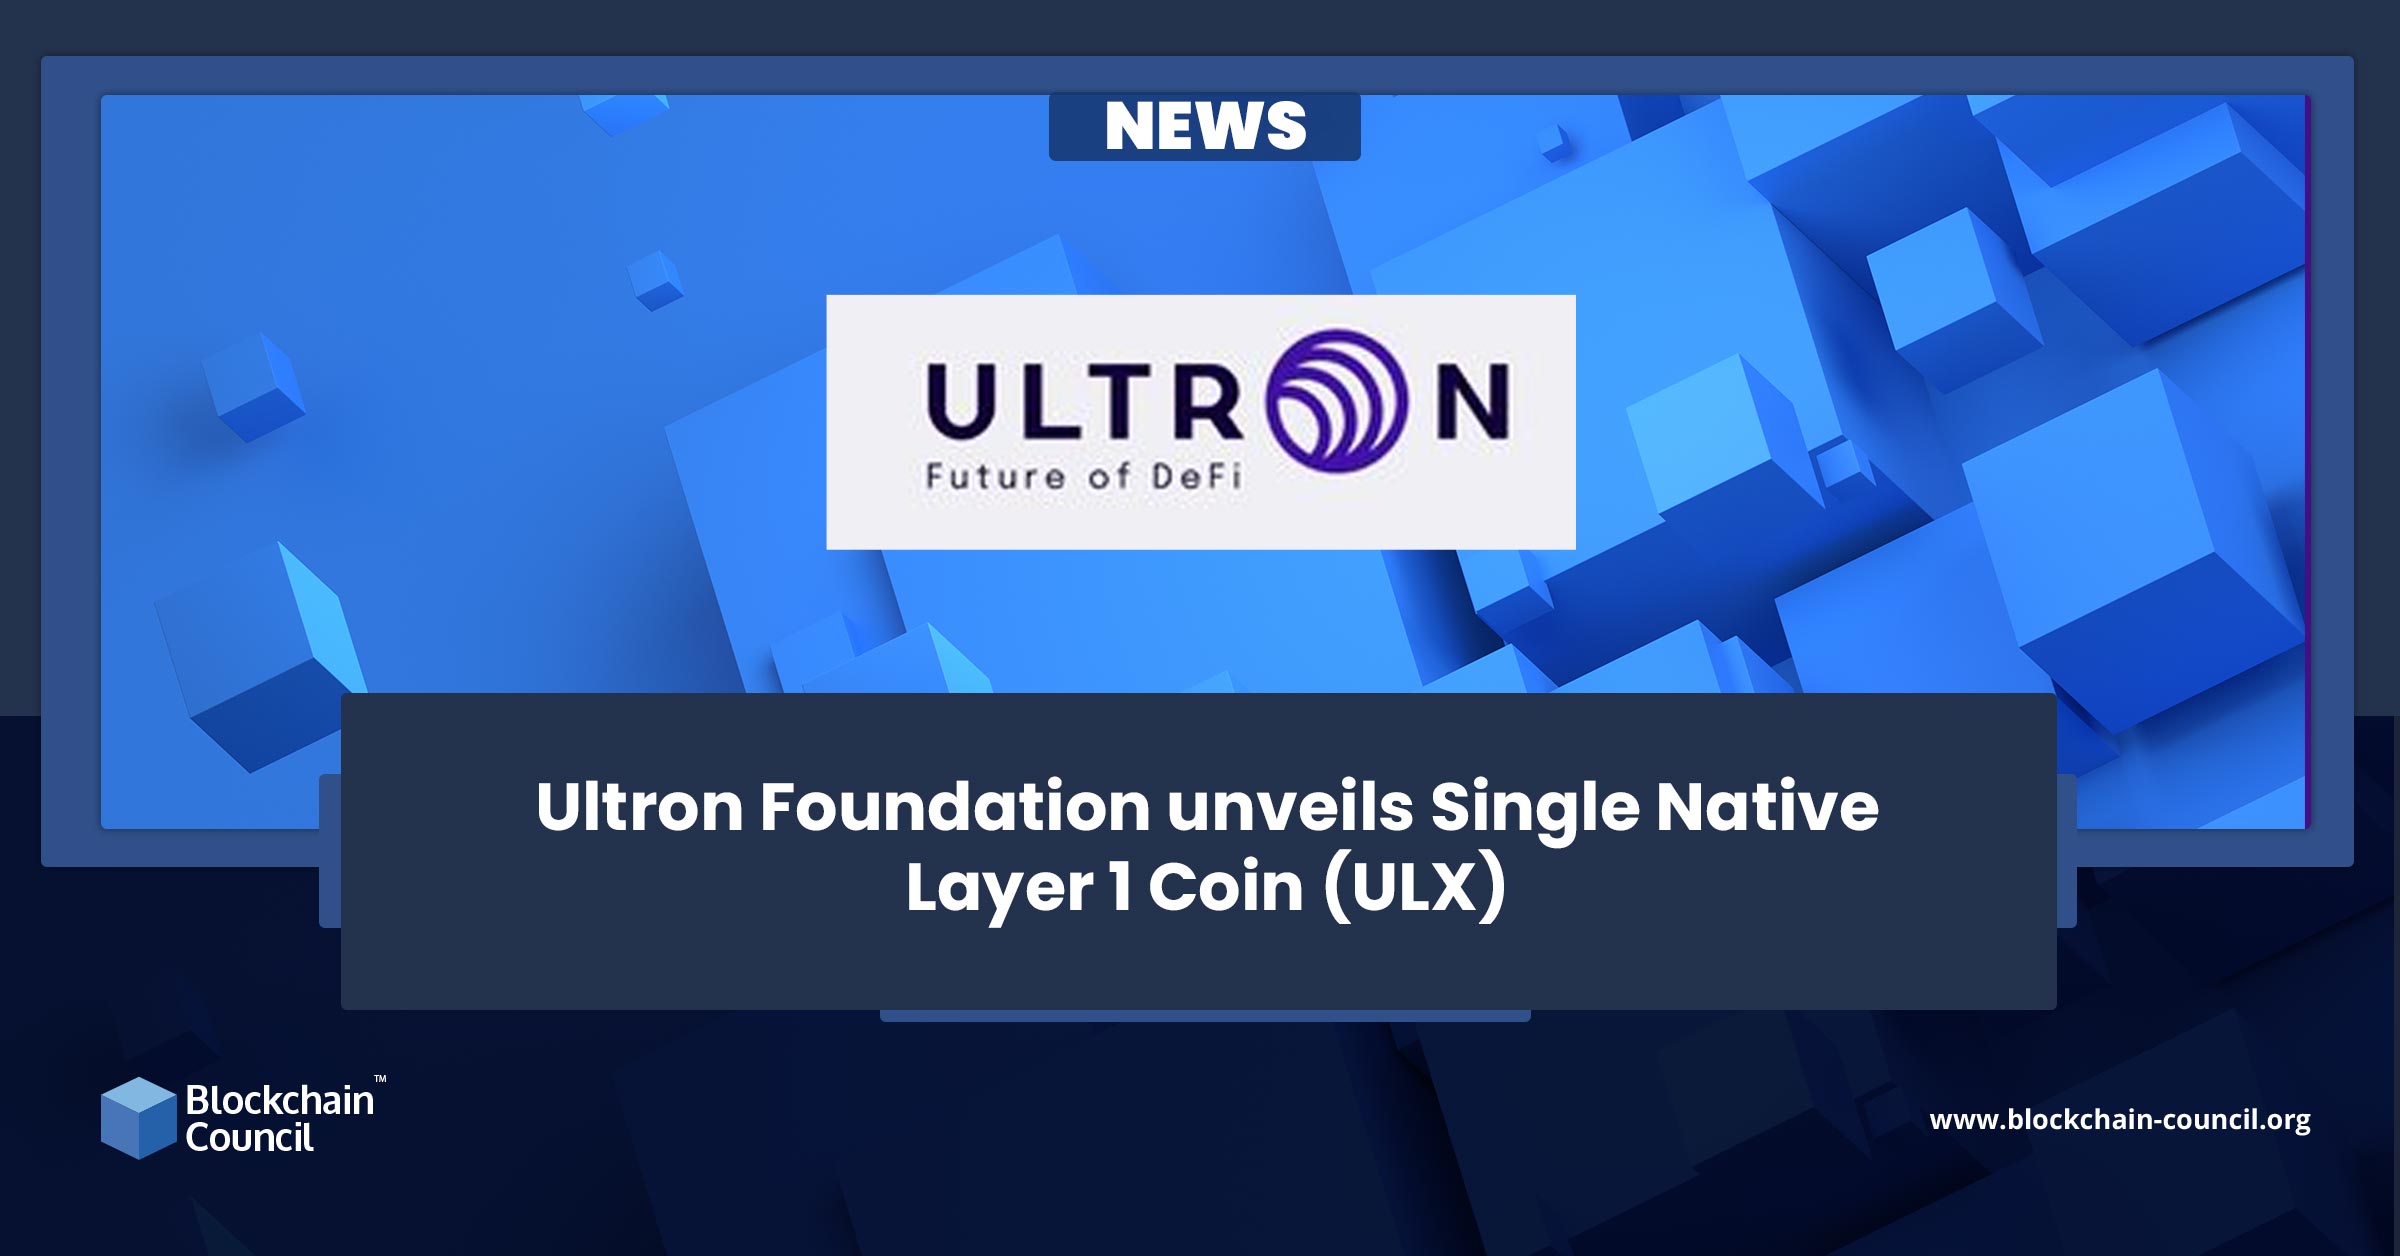 Ultron Foundation unveils Single Native Layer 1 Coin (ULX)